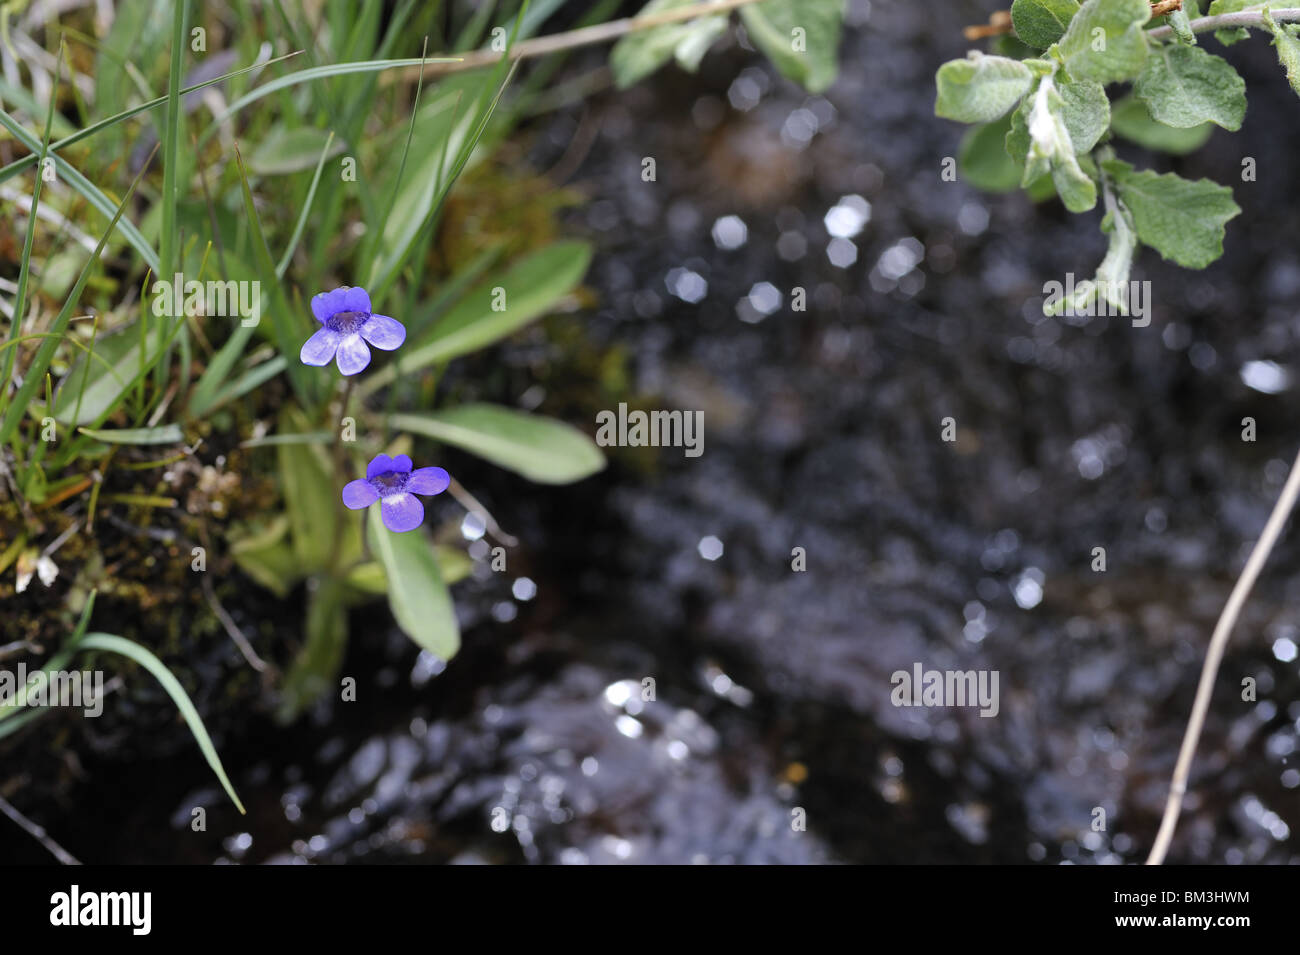 Leafs and flower of a common butterwort (marsh violet) Stock Photo